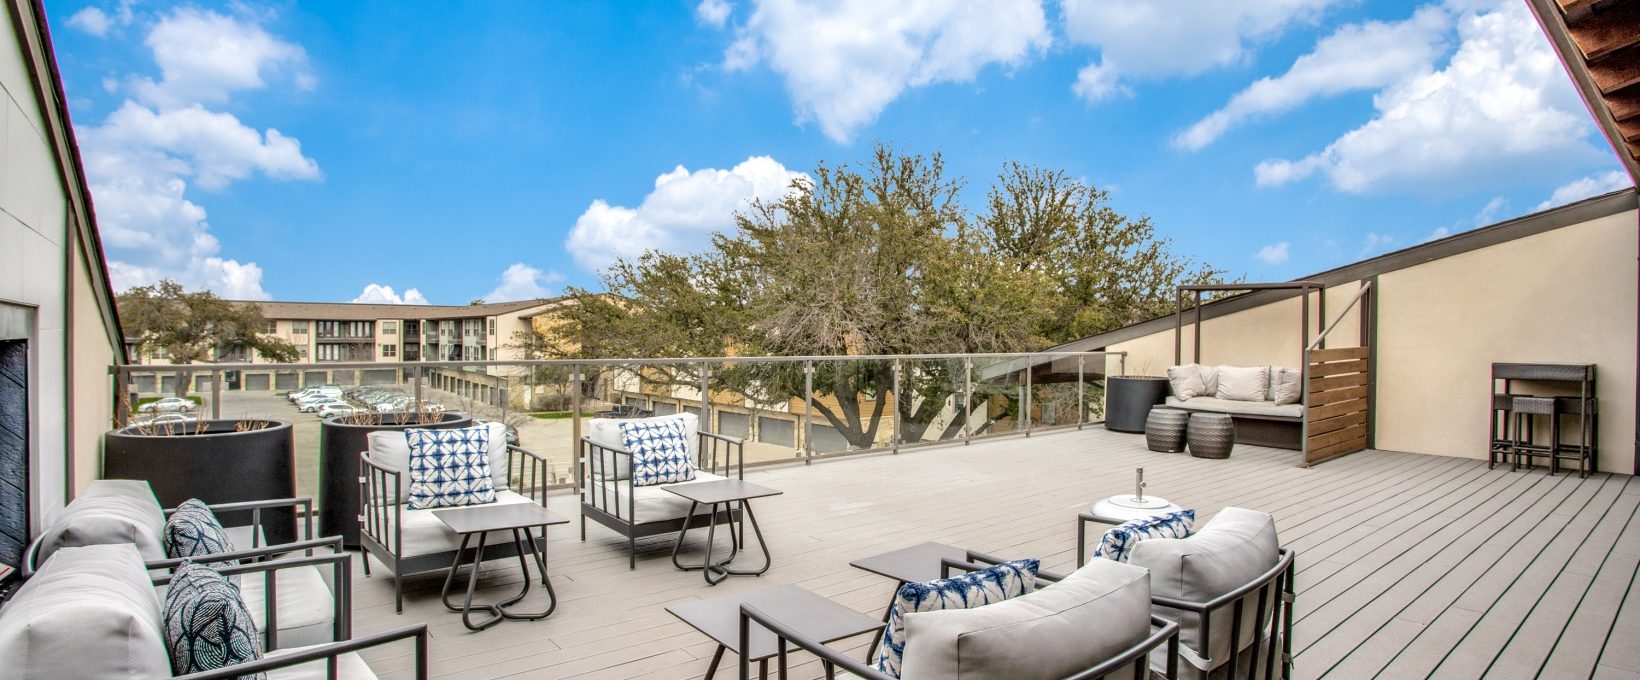 the deck has a large patio with furniture and a view of the city at The Live Oak at  Branch